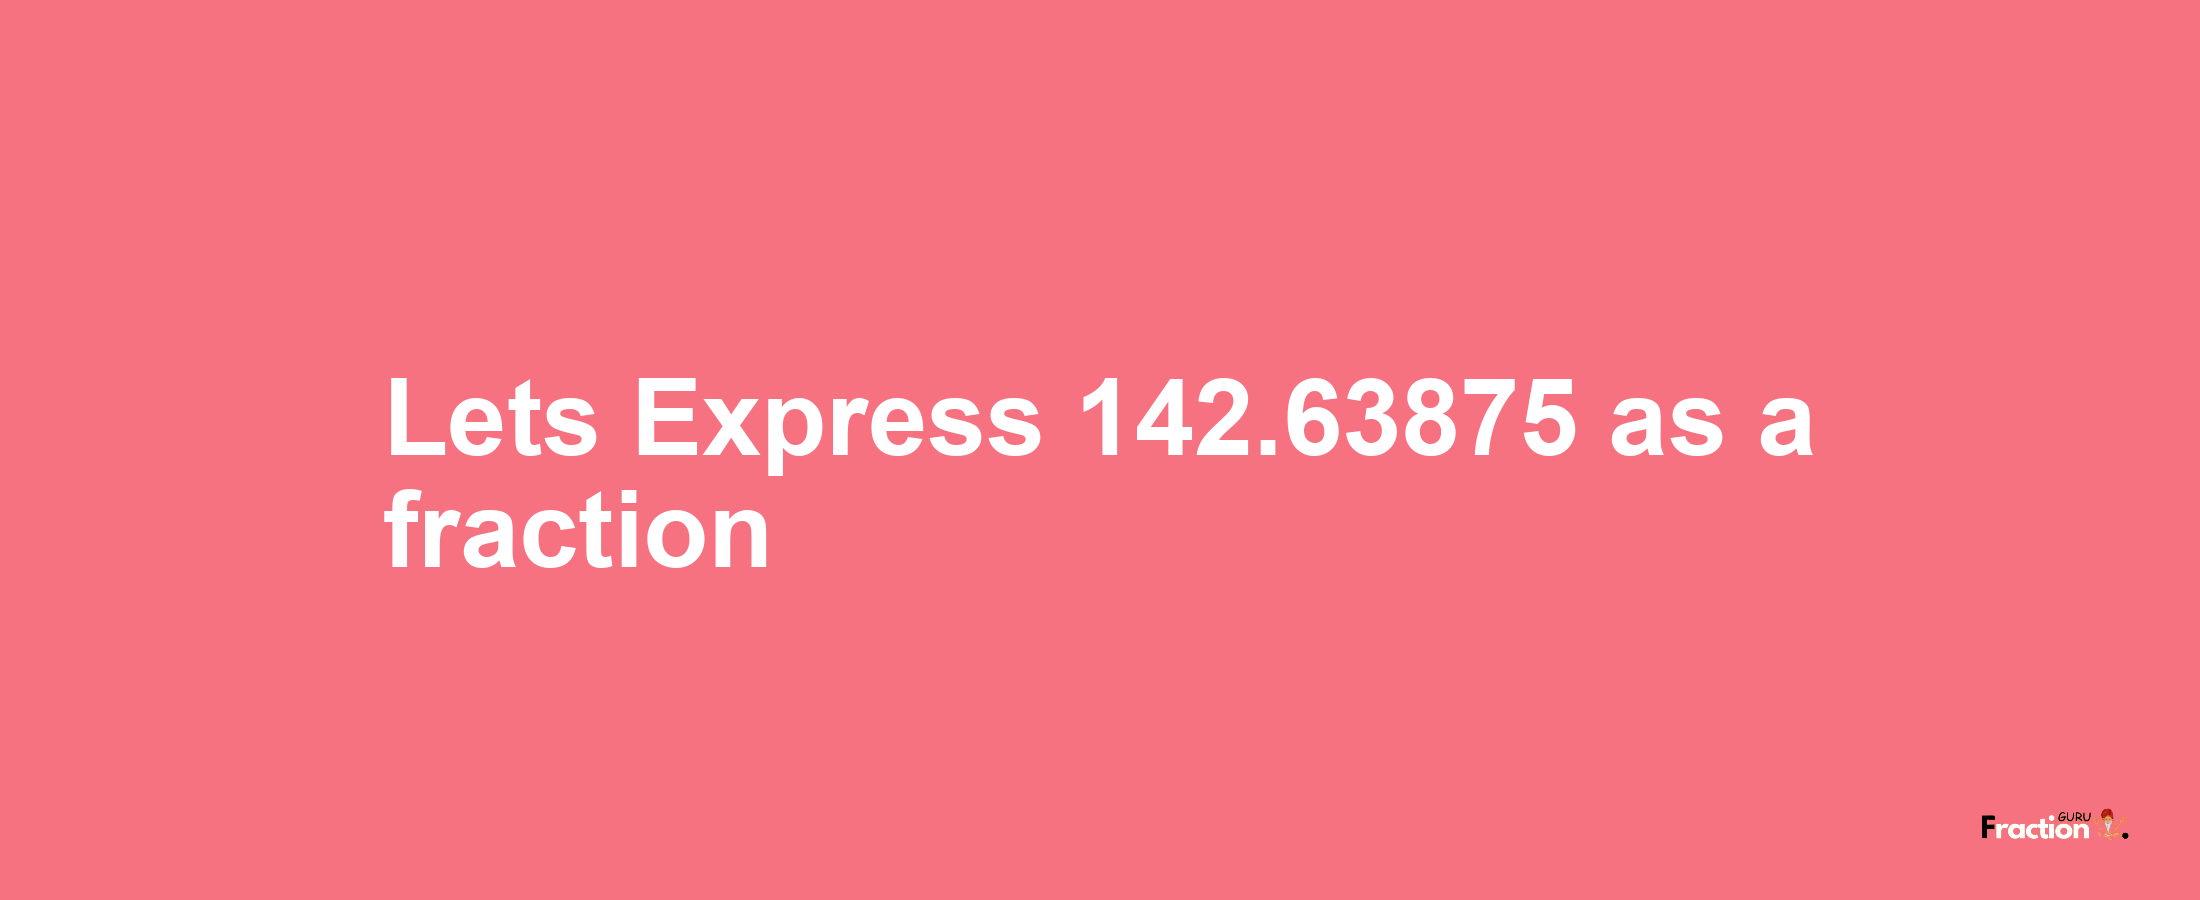 Lets Express 142.63875 as afraction